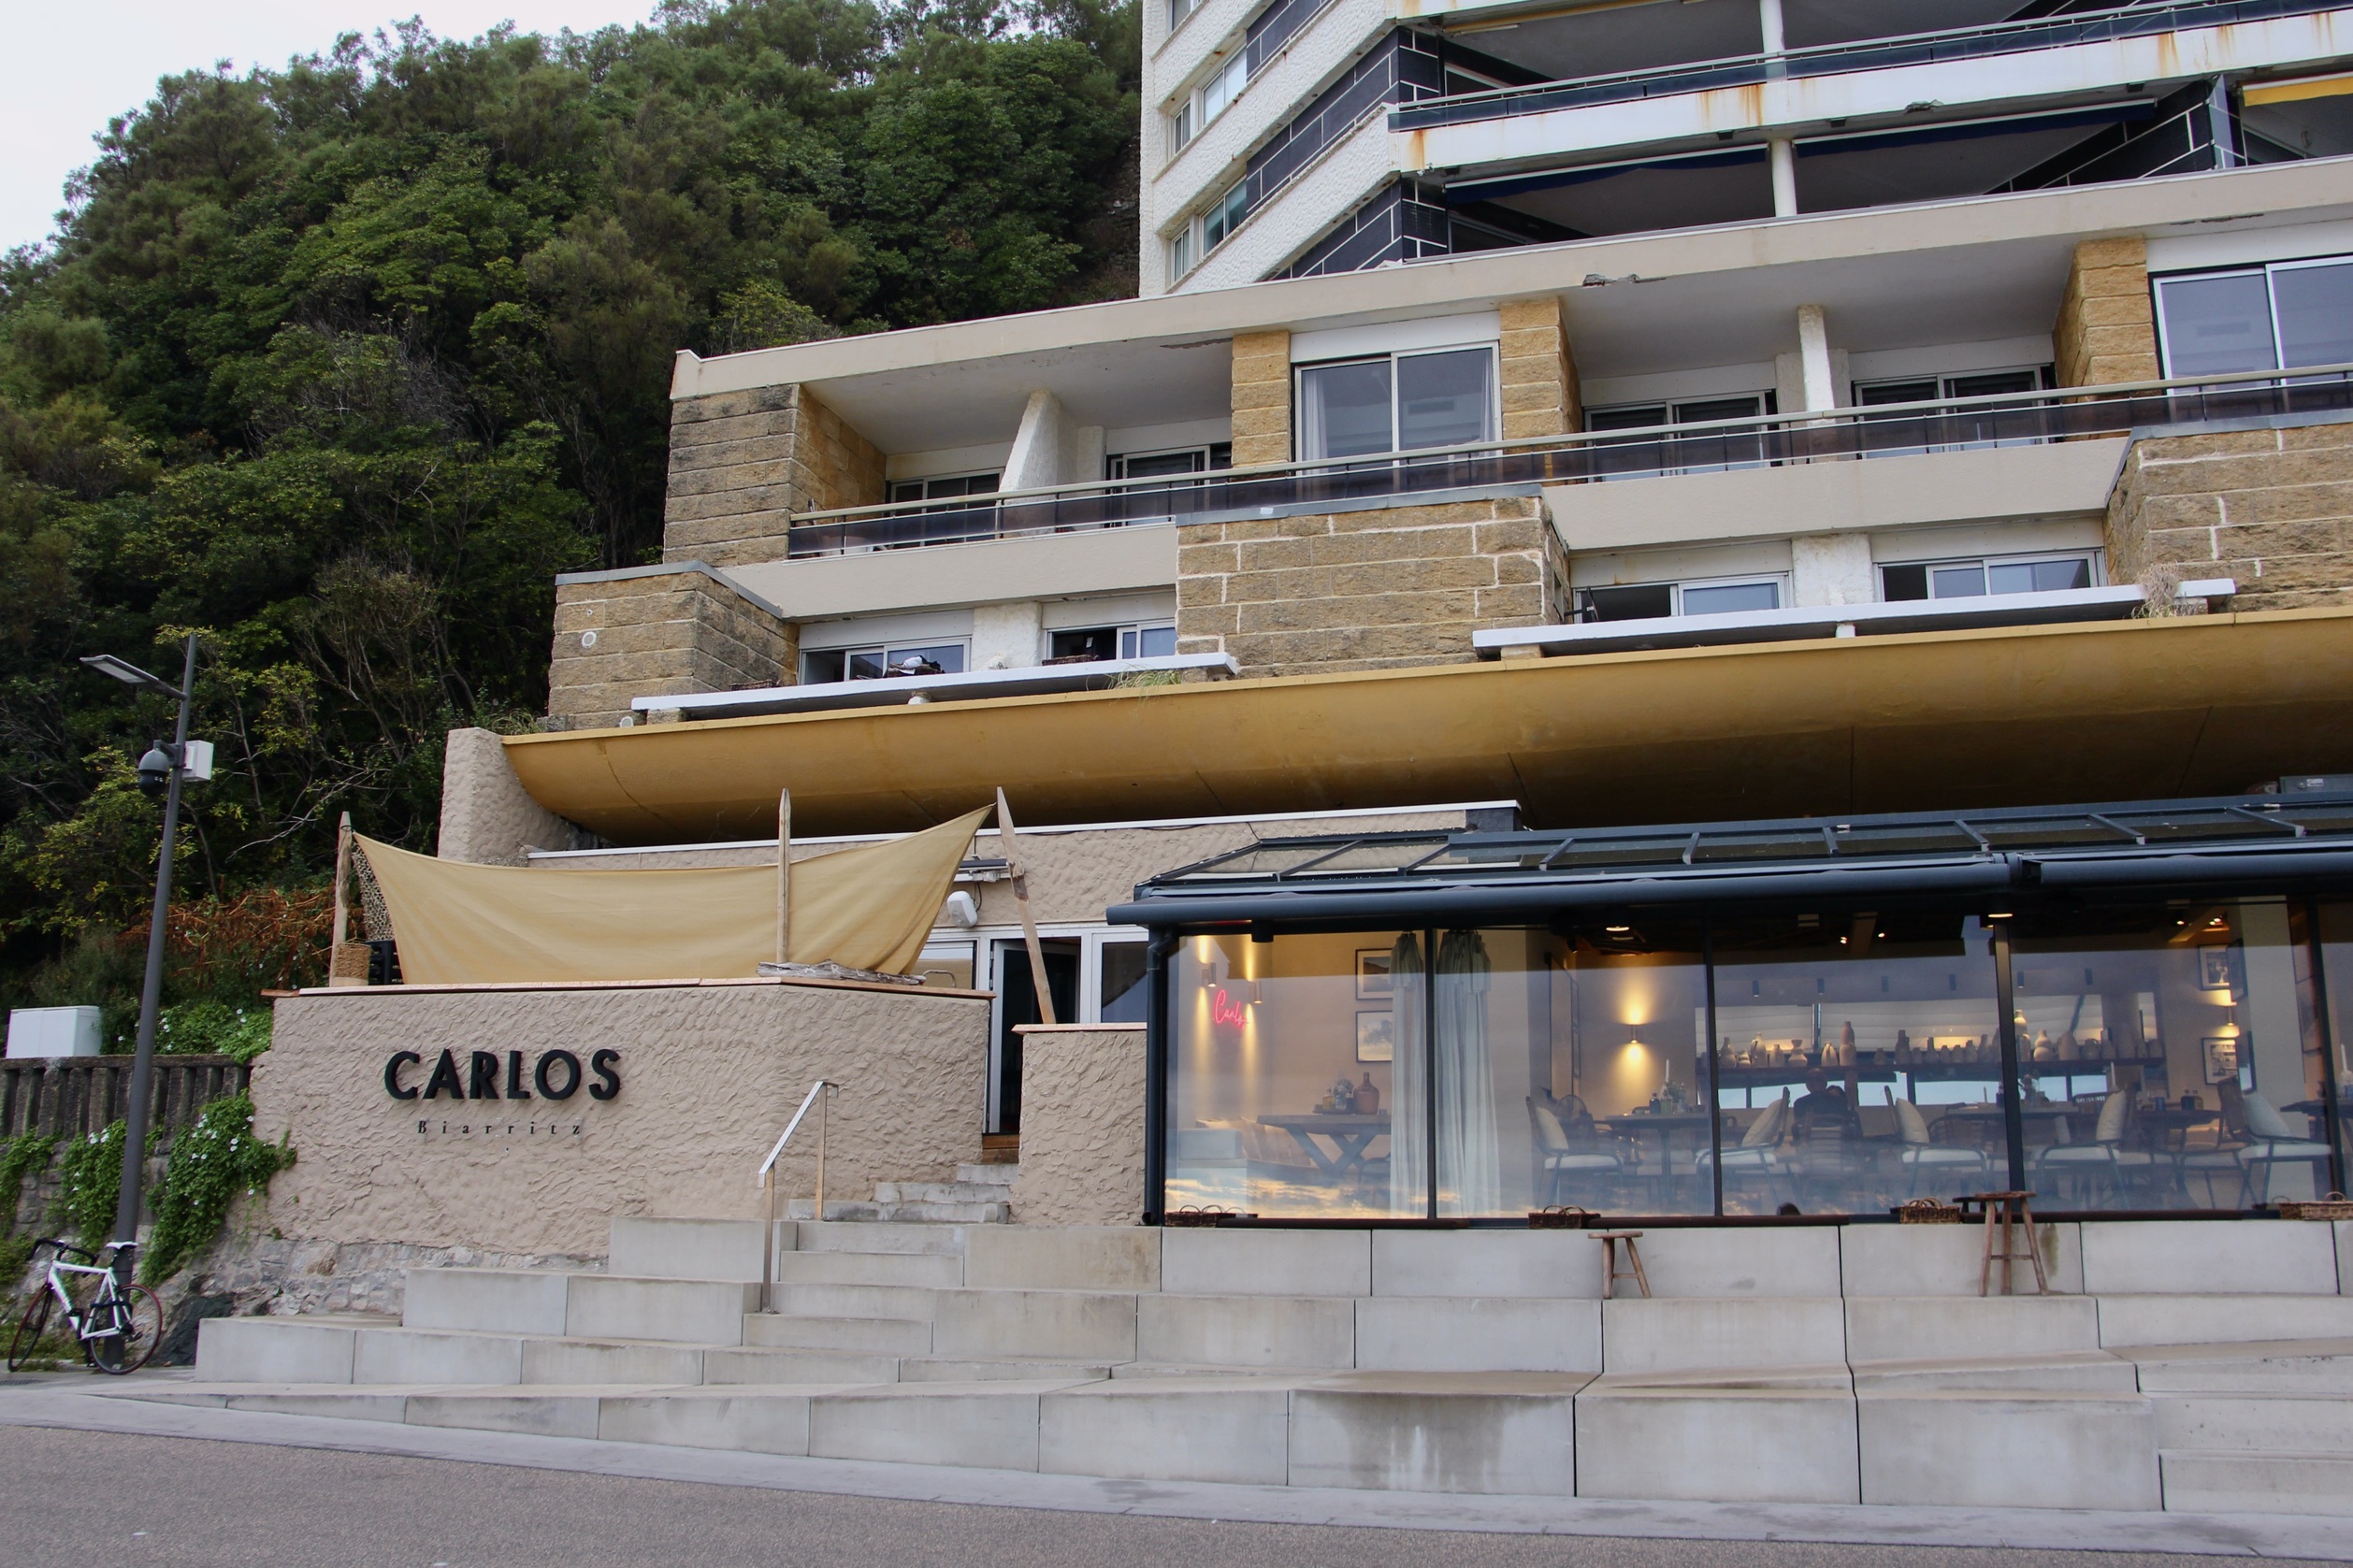 The exterior of Carlos, a bar and restaurant in Biarritz, France.